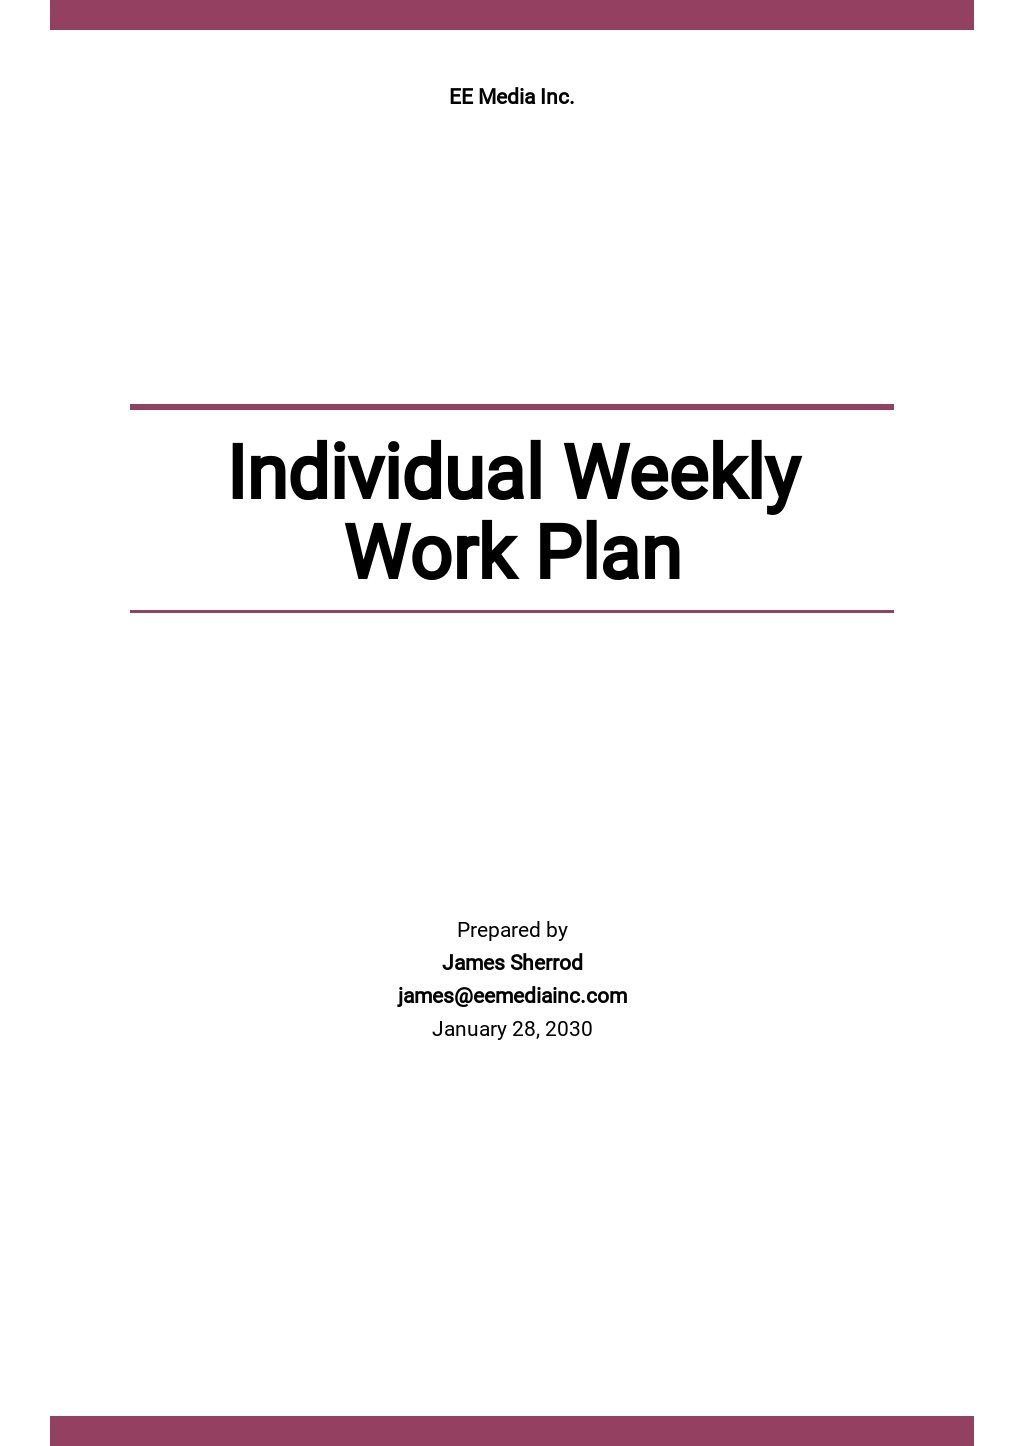 individual-weekly-work-plan-template-google-docs-word-apple-pages